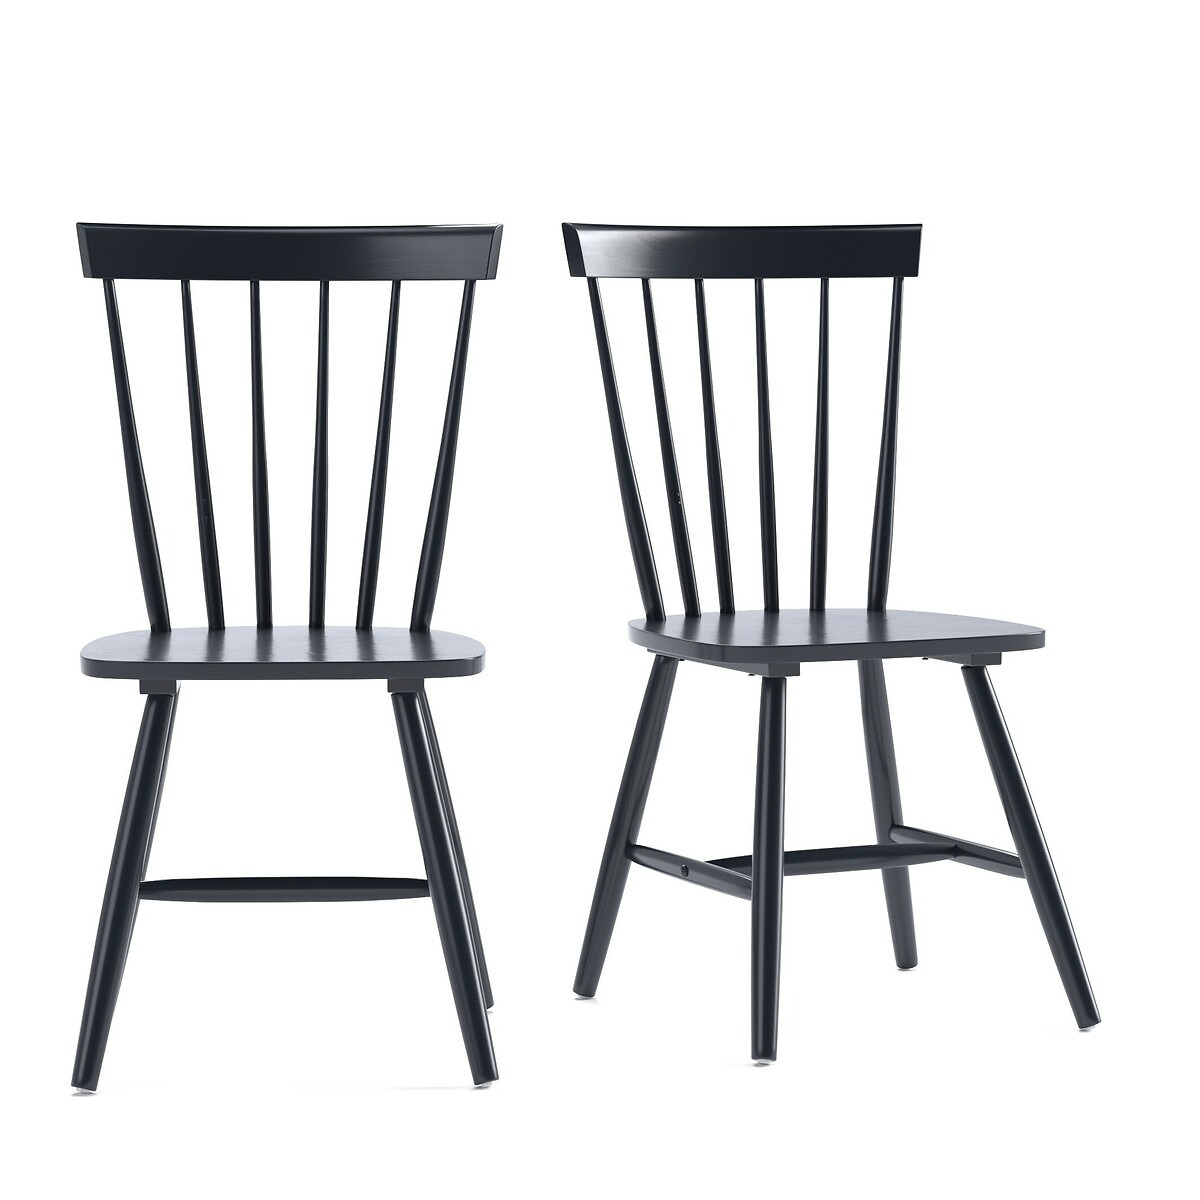 Set of 2 Jimi Solid Wood Spindle-Back Chairs - image 1